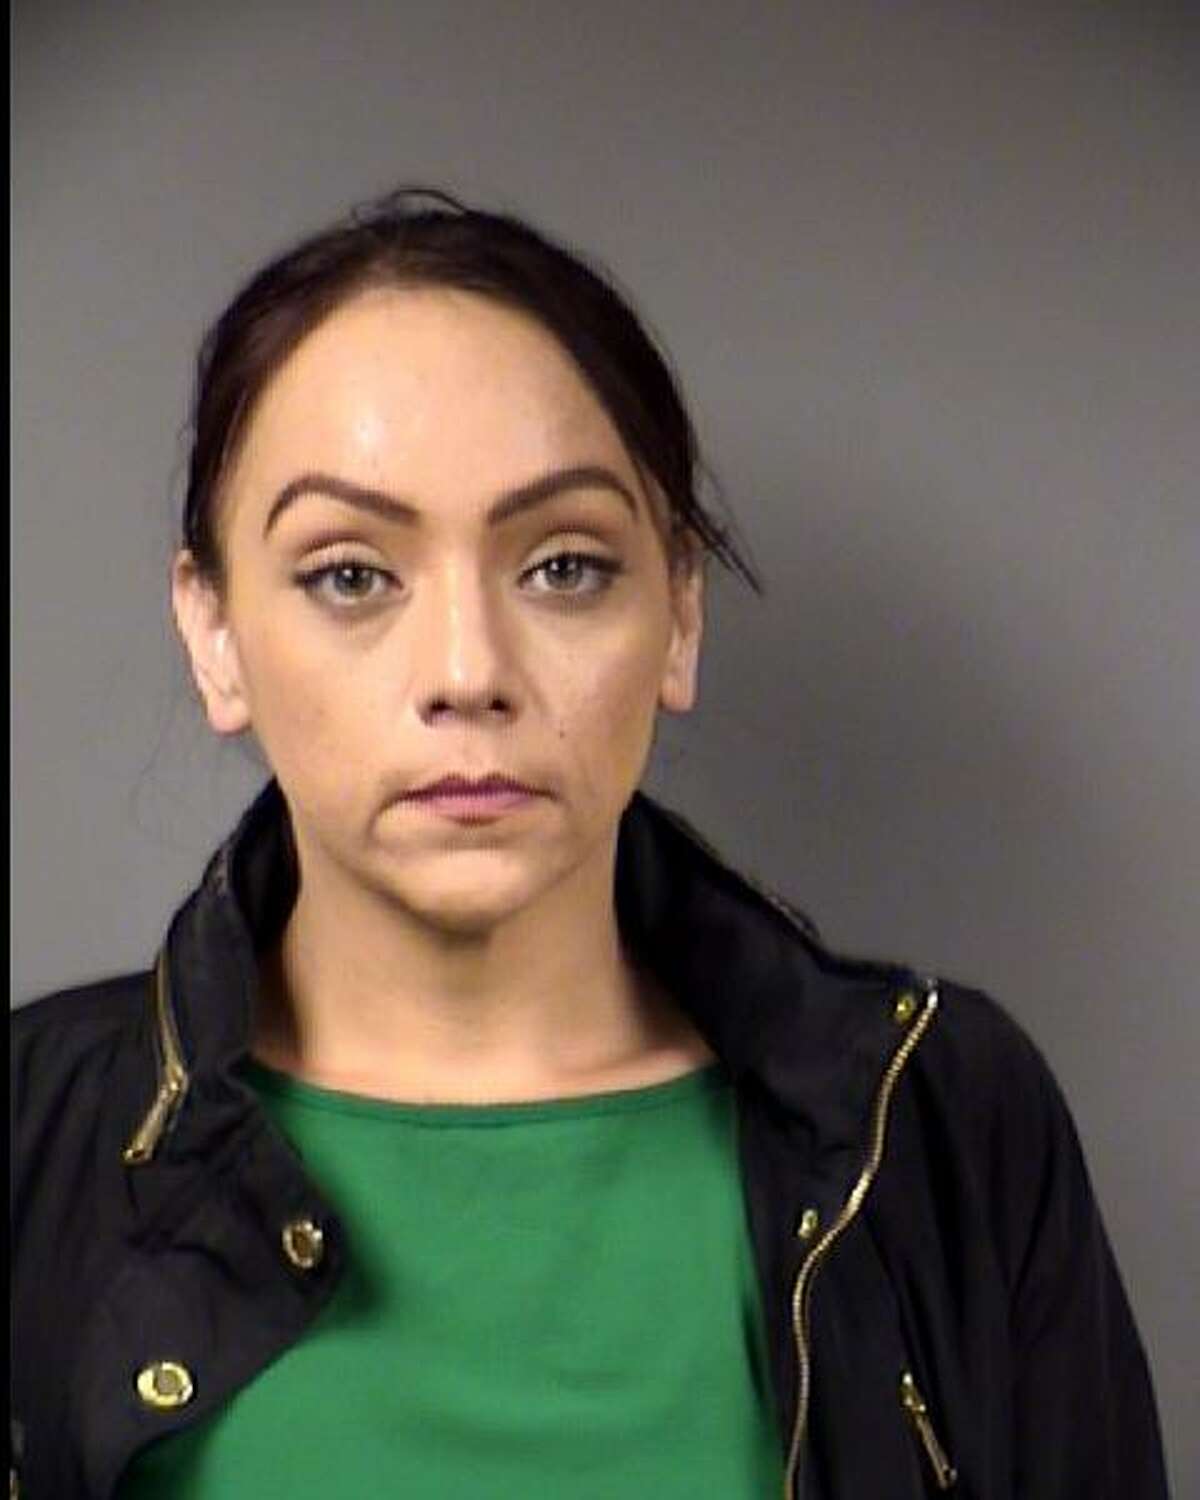 Priscilla Ann Salias, 37, was arrested on two counts of child endangerment on Tuesday, Jan. 11, 2022. She is accused of leaving two toddlers alone and tied up in a Southeast Side home in San Antonio.